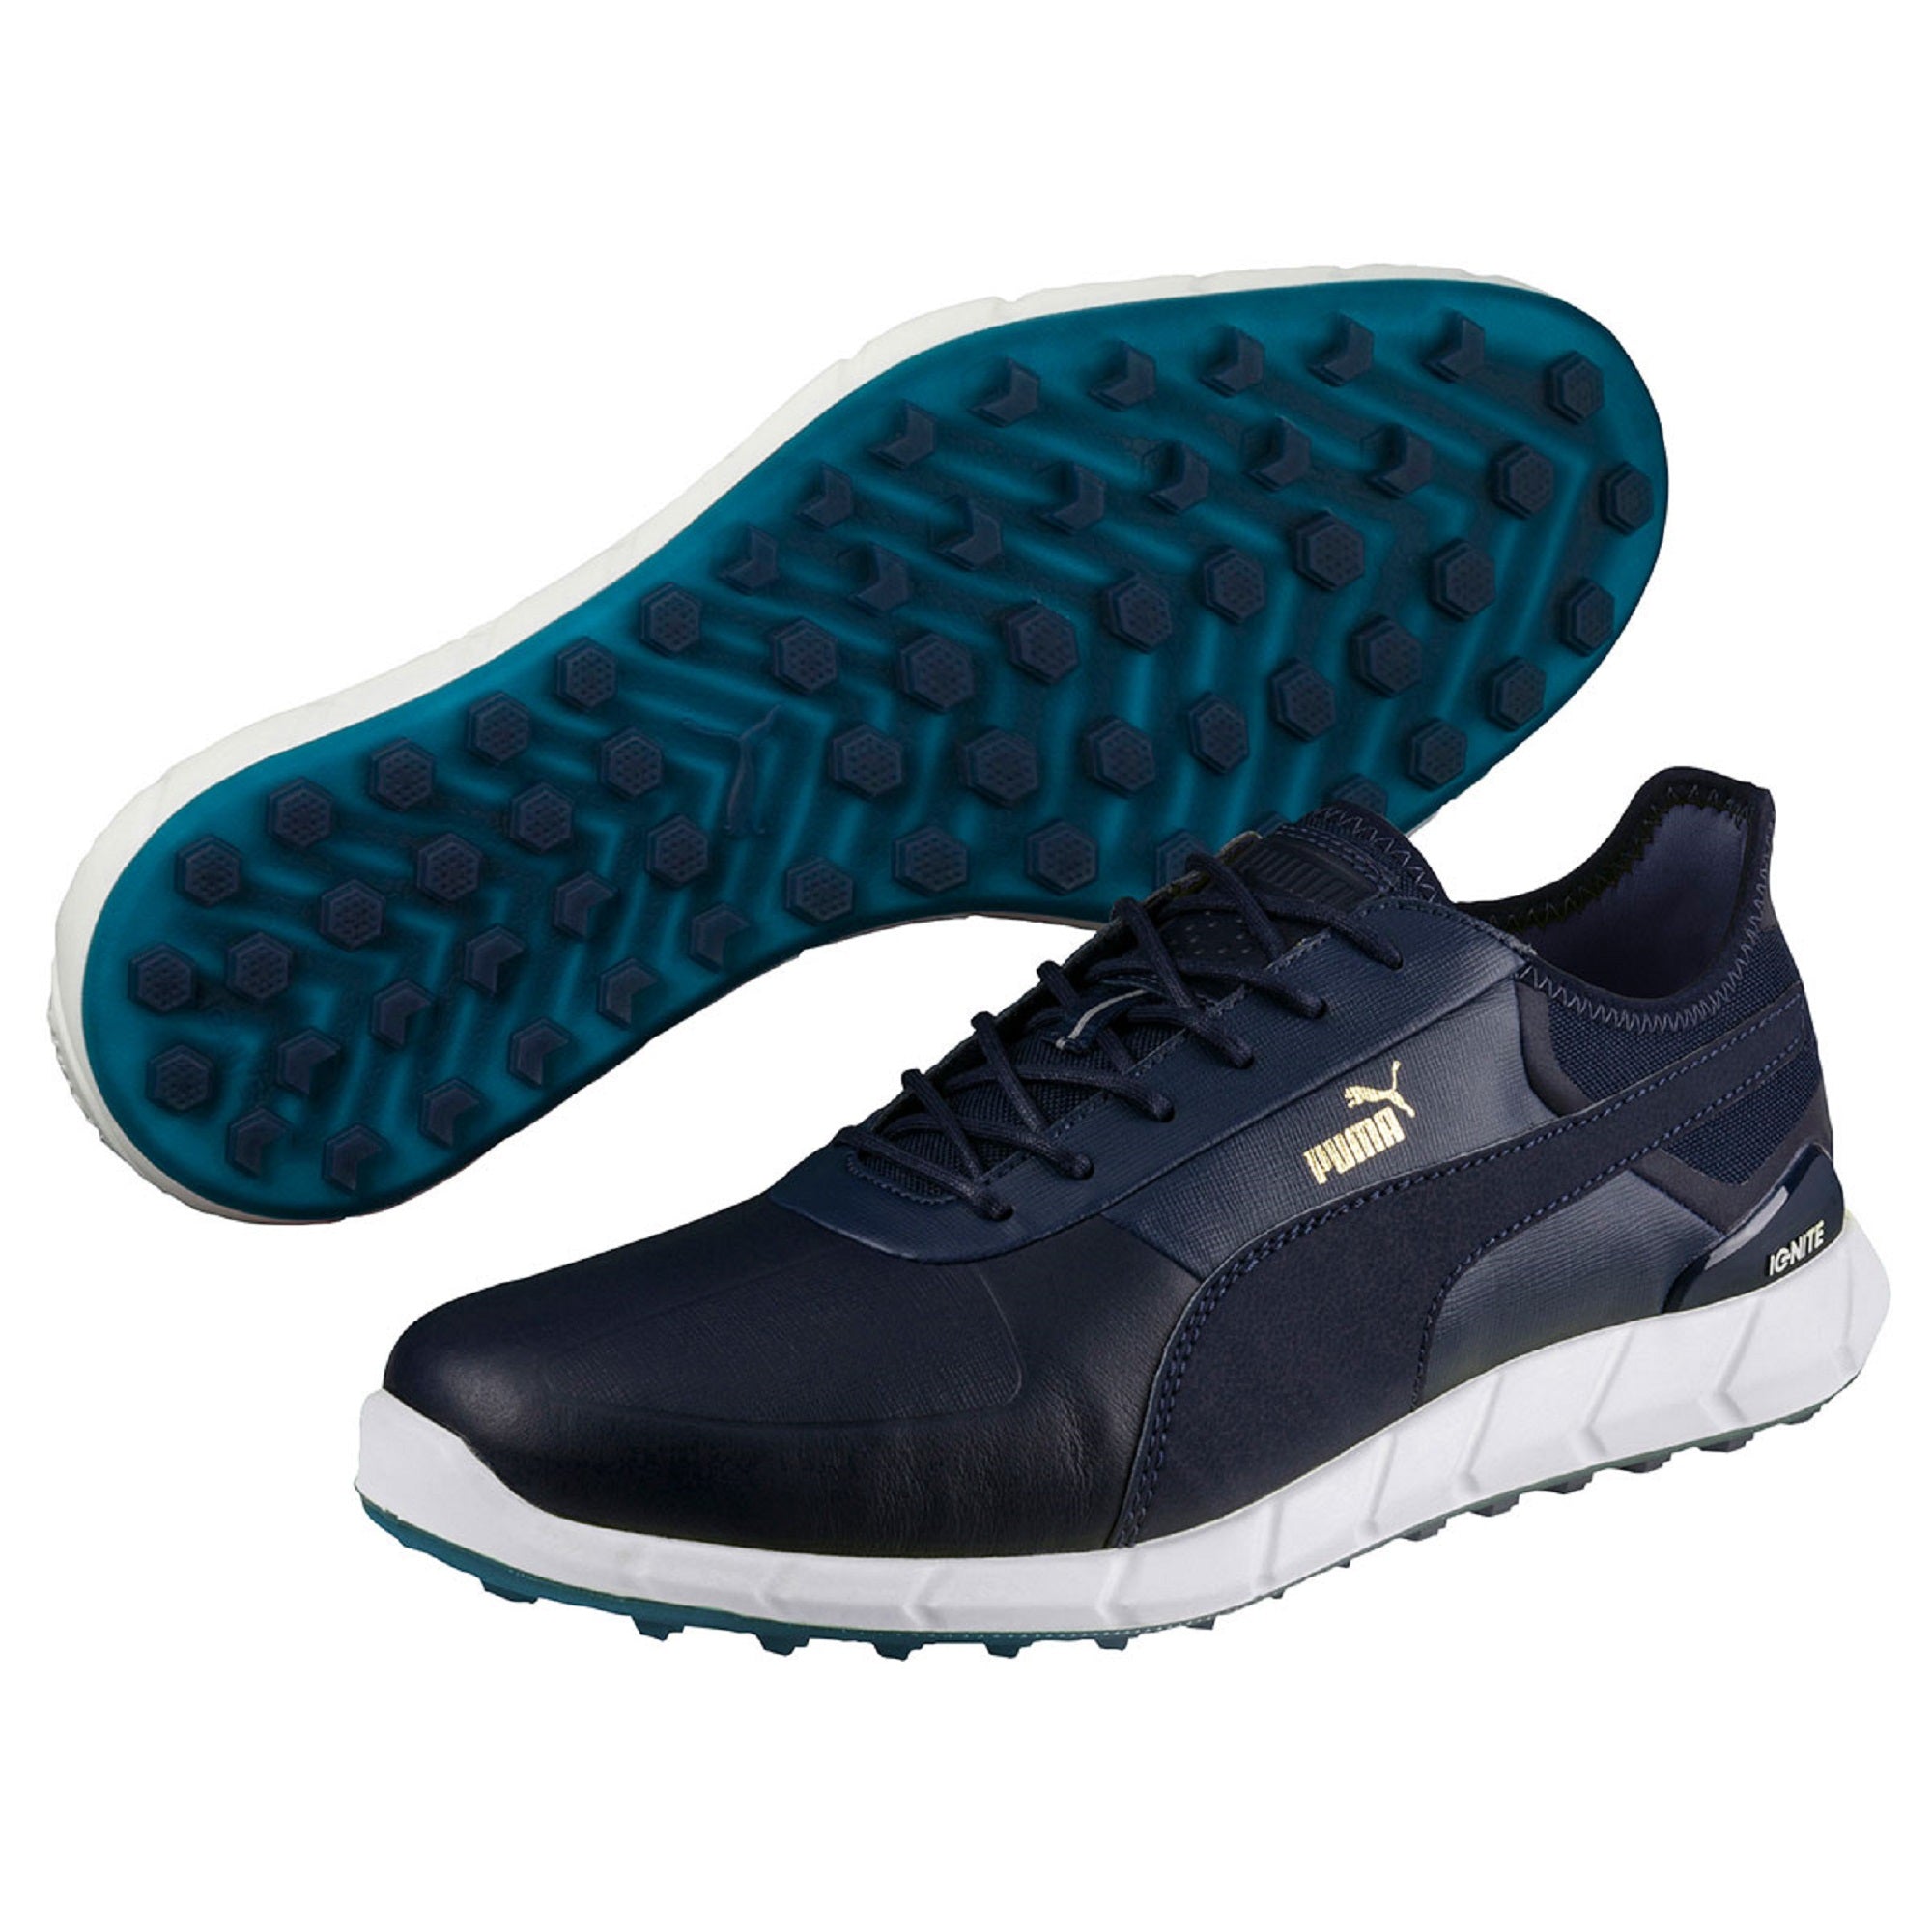 Puma Ignite Spikeless Lux Golf Shoes 